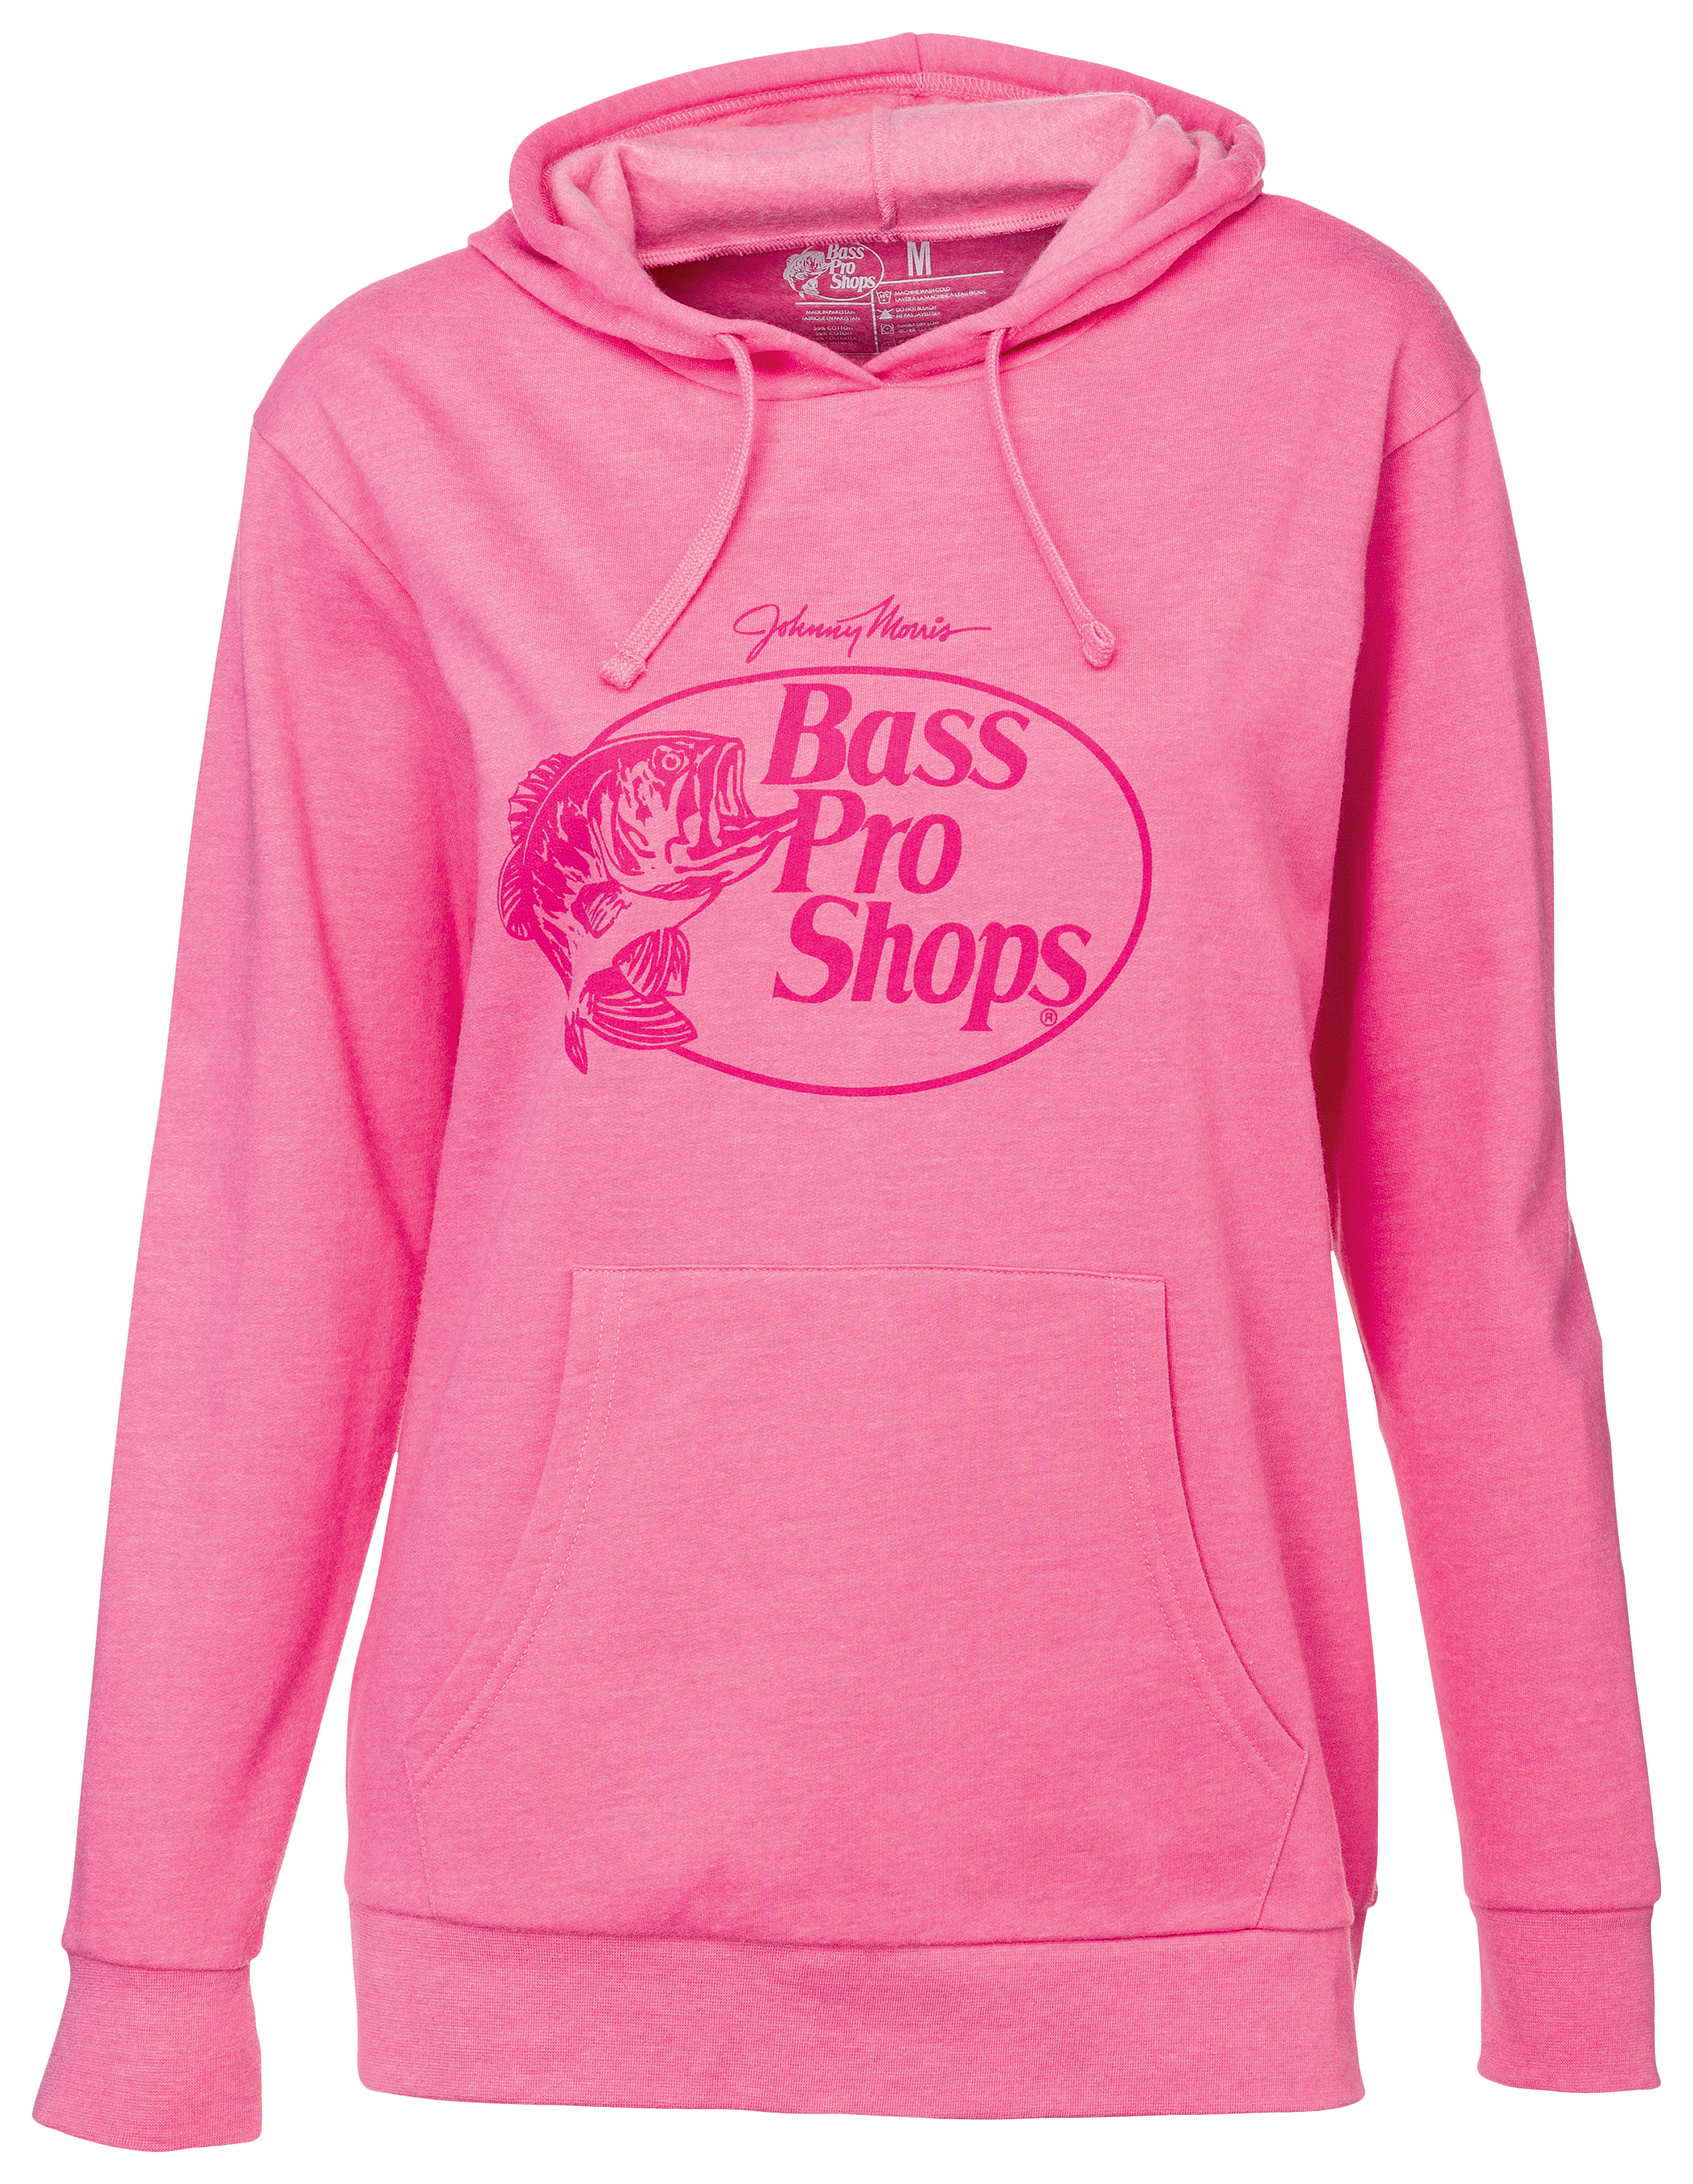 Bass Pro Shops Logo Hoodie for Ladies